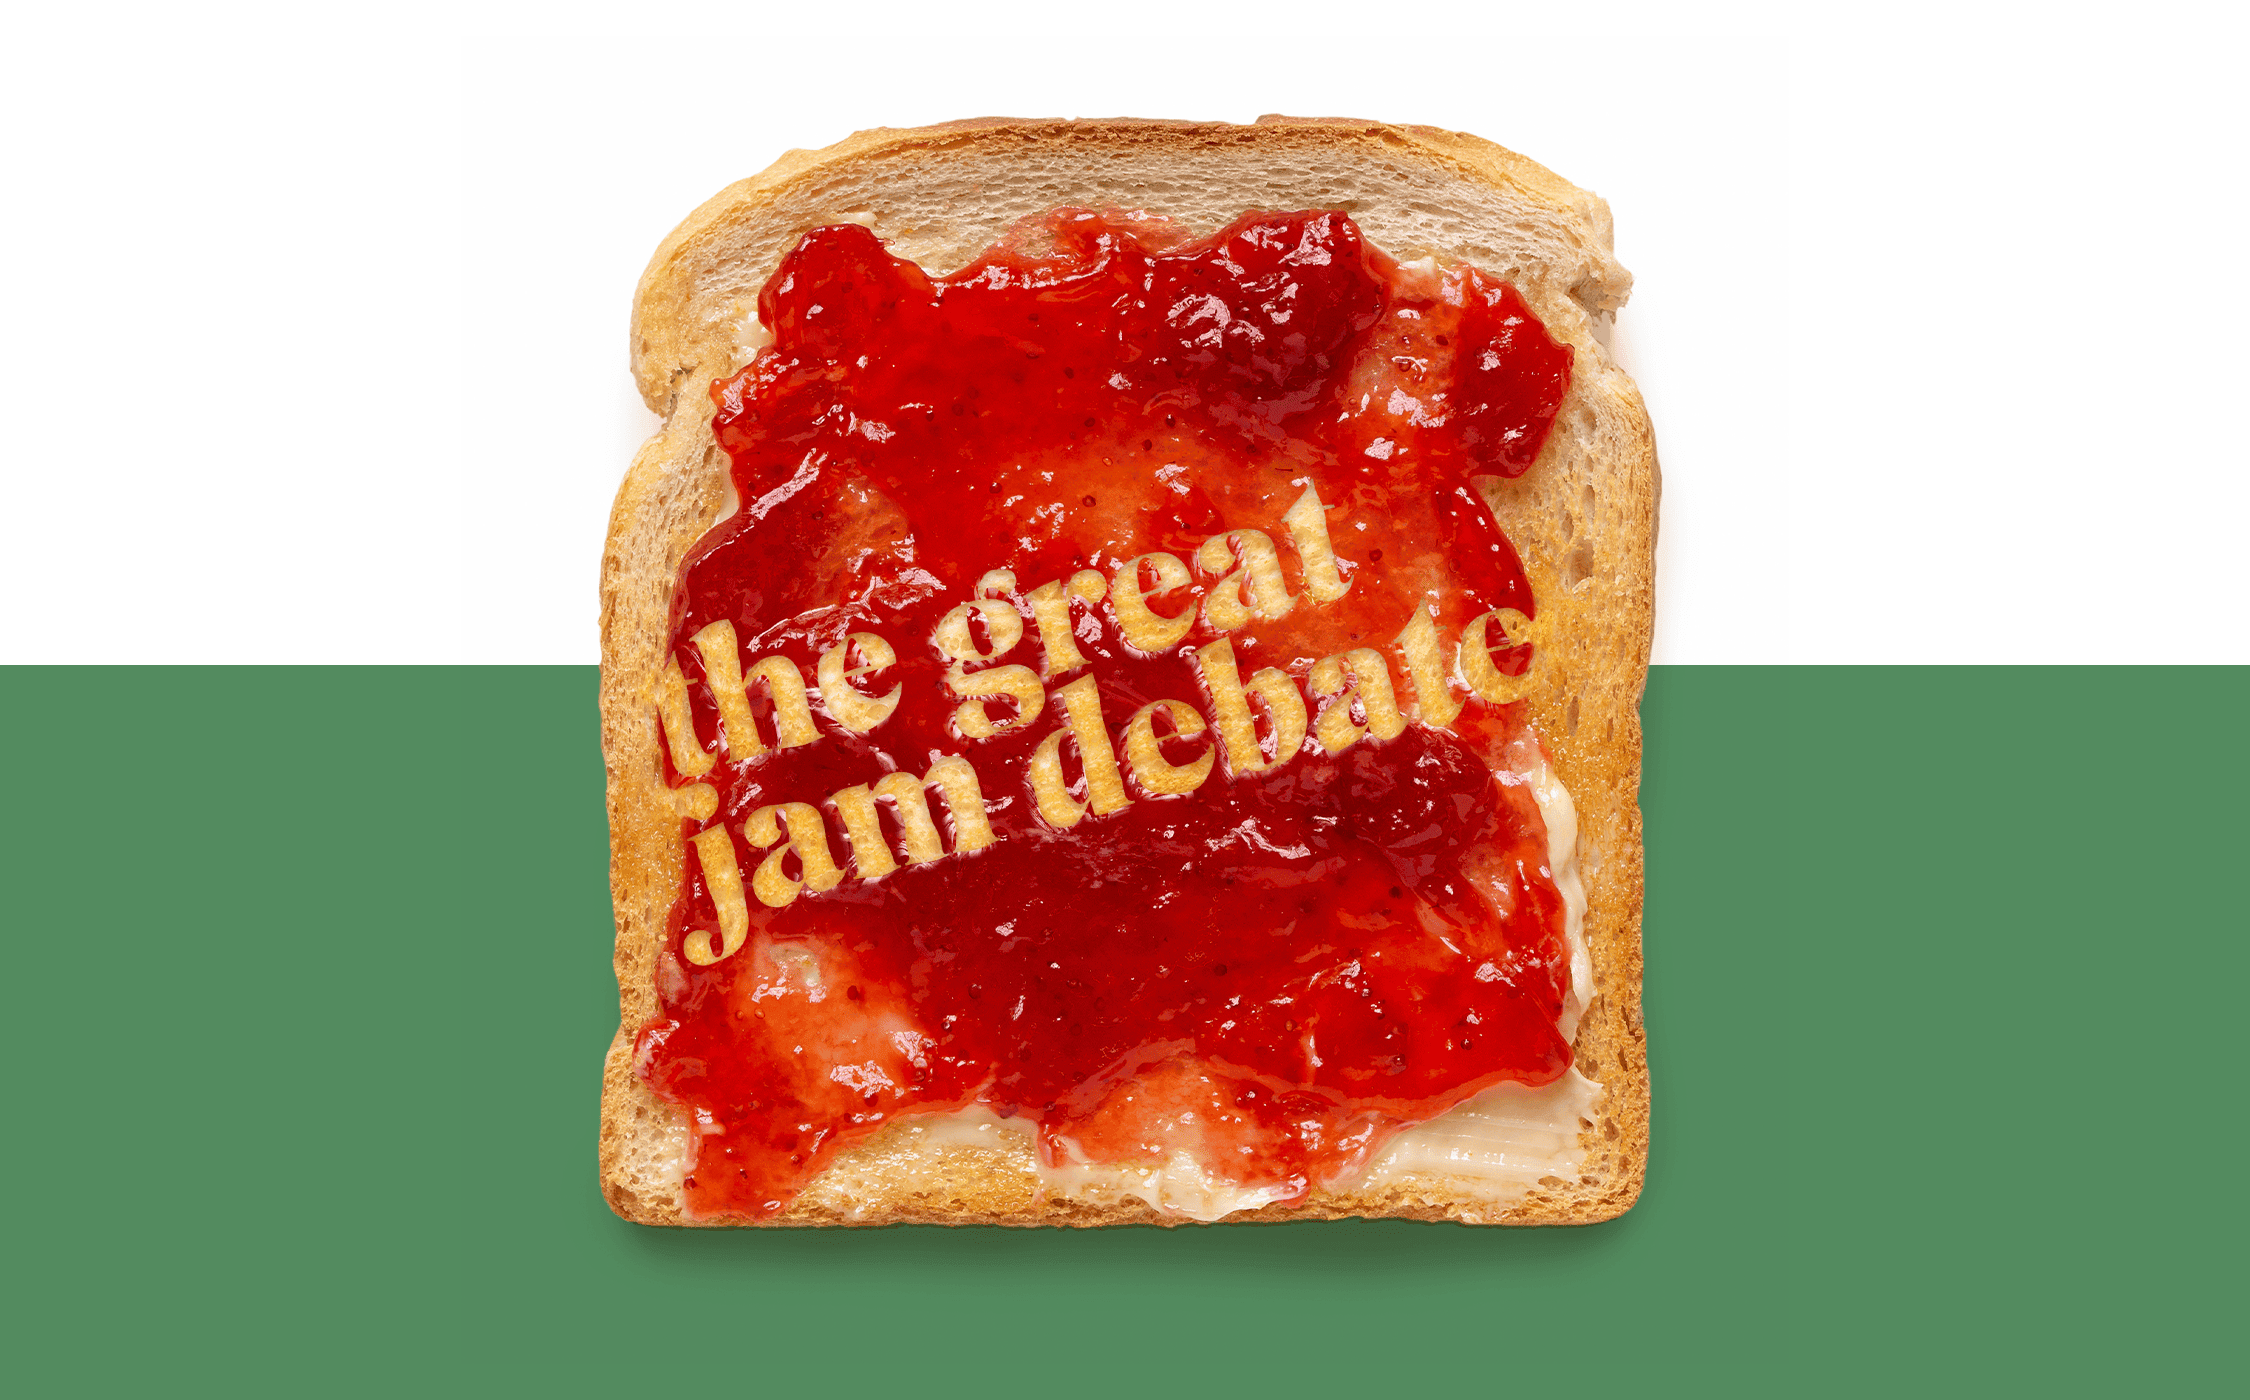 Minor Annoyances: "The Great Jam Debate" spelled out in jam on a piece of toast.